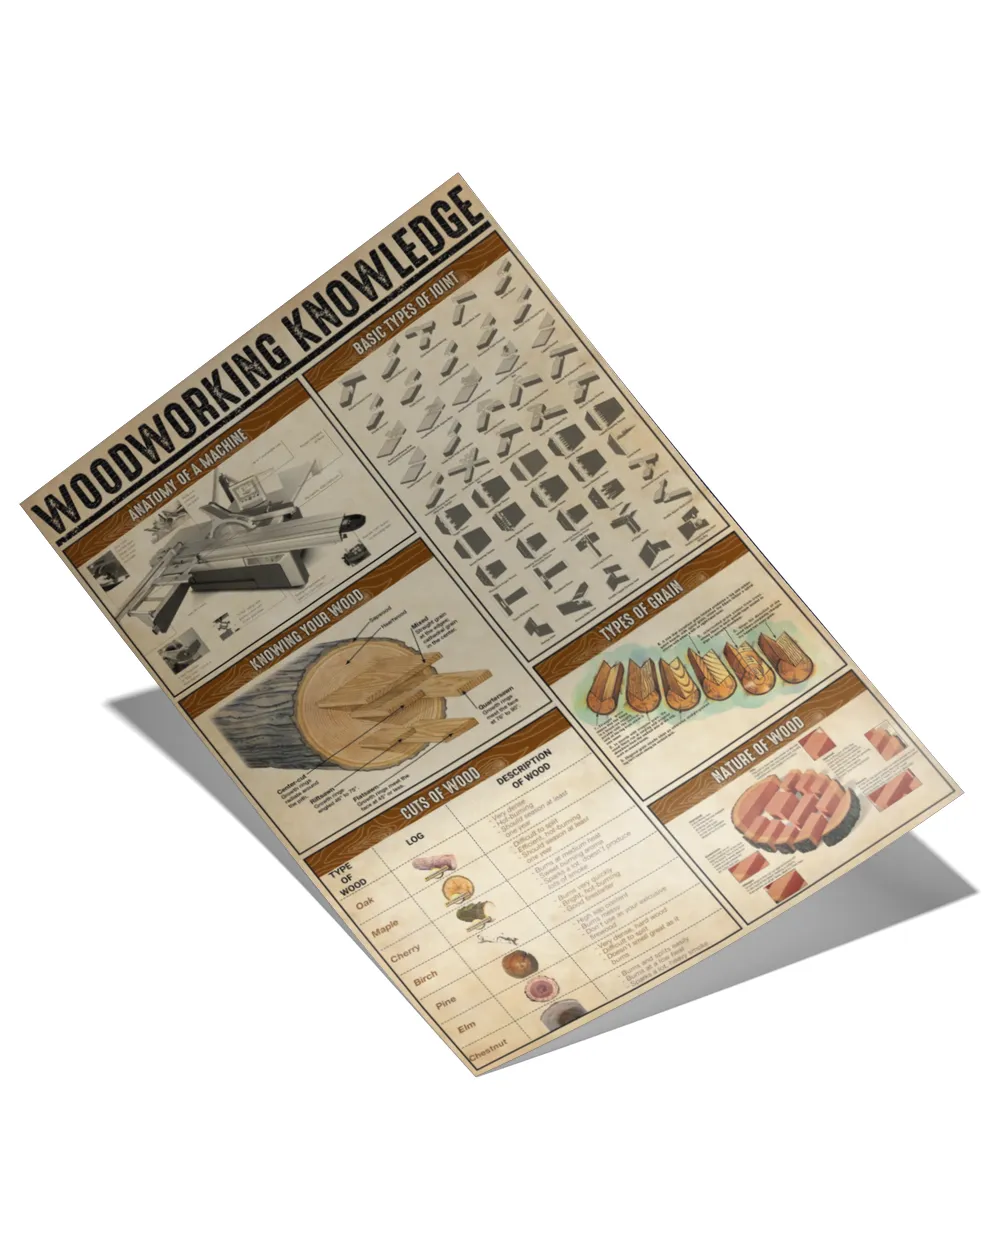 home decor poster woodworking knowledge poster ideal gift